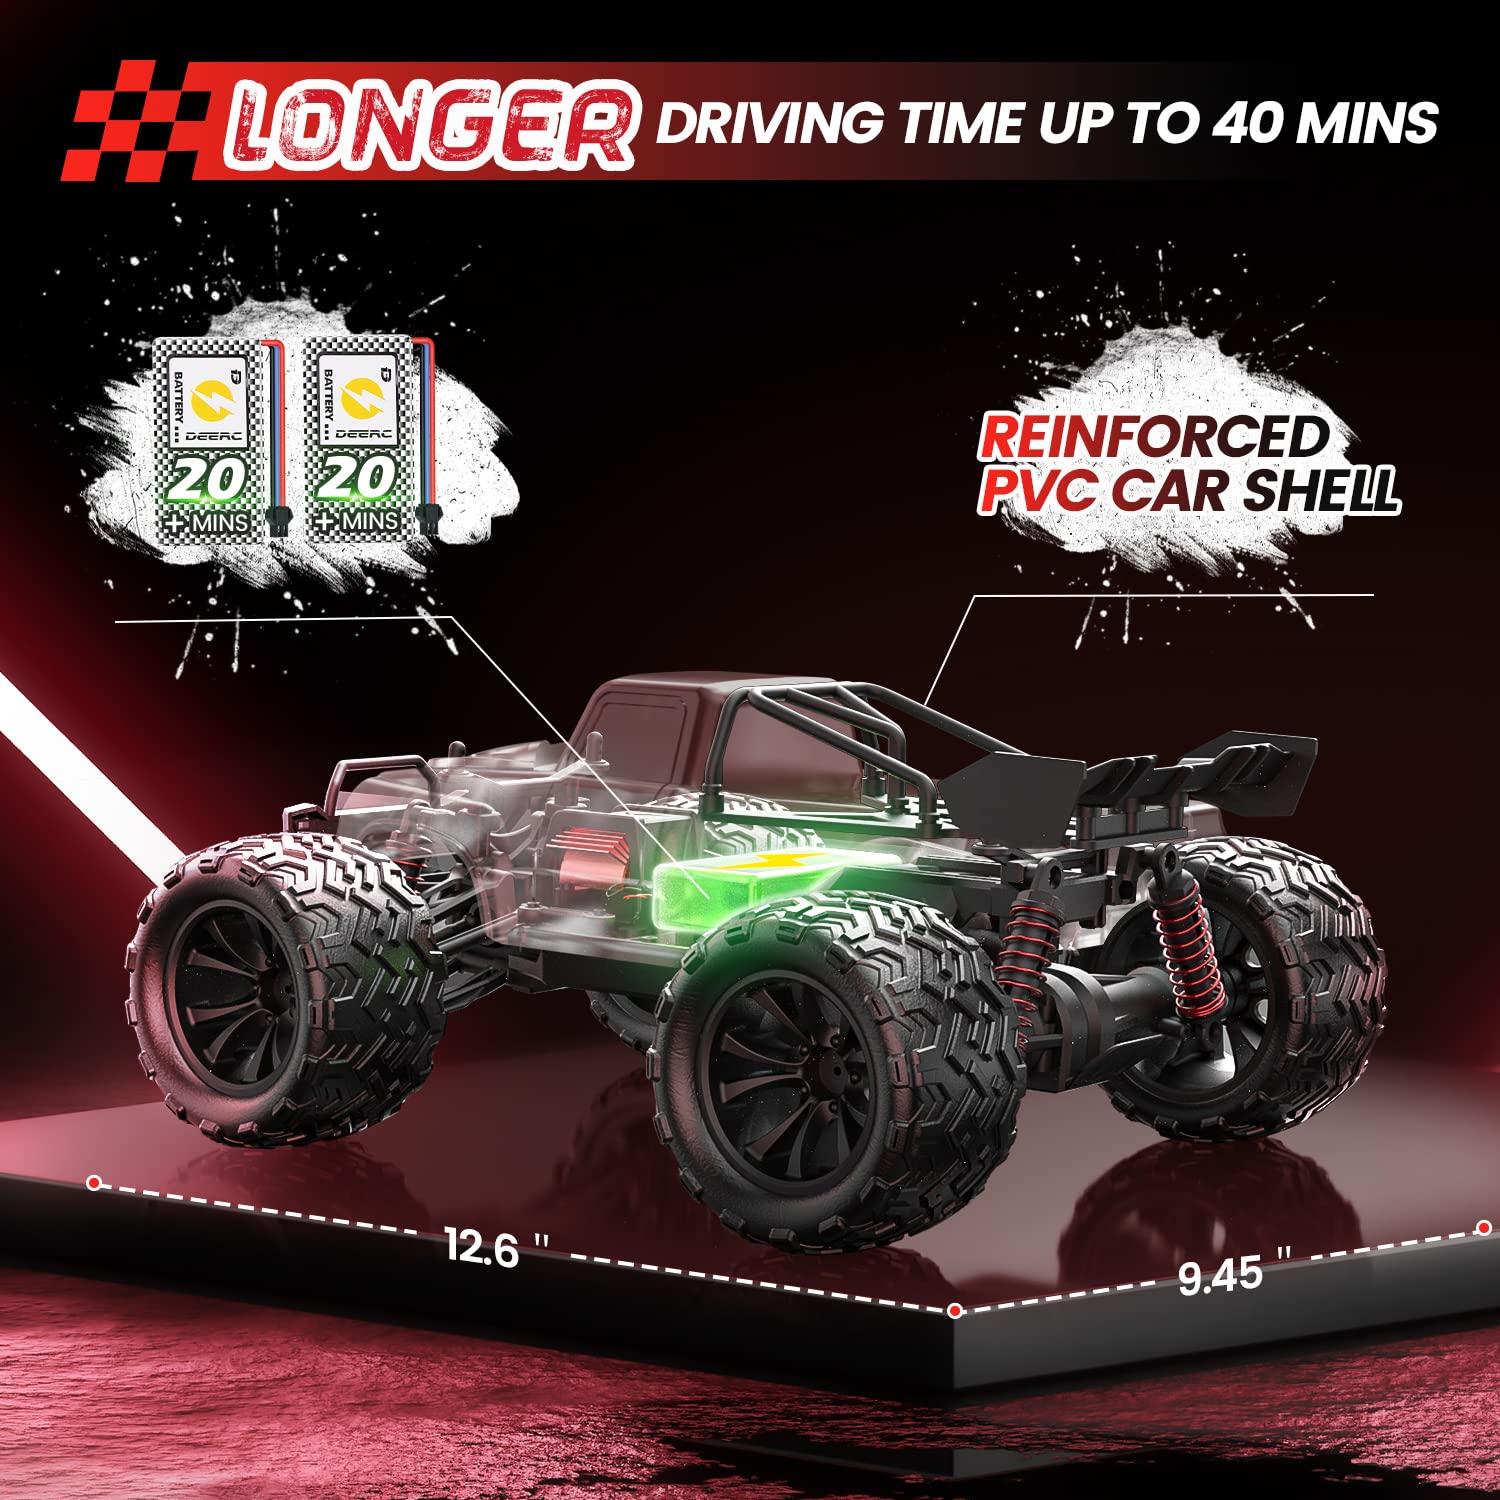 DEERC 9500E 1:16 Scale High Speed RC Car, RC Monster Truck,Racing Hobby Car for Adults, 40+kmh, 4WD All Terrain Off-Road Remote Control Car, 2.4Ghz RC Crawler, 2 Battery, Toy Gift for Kids